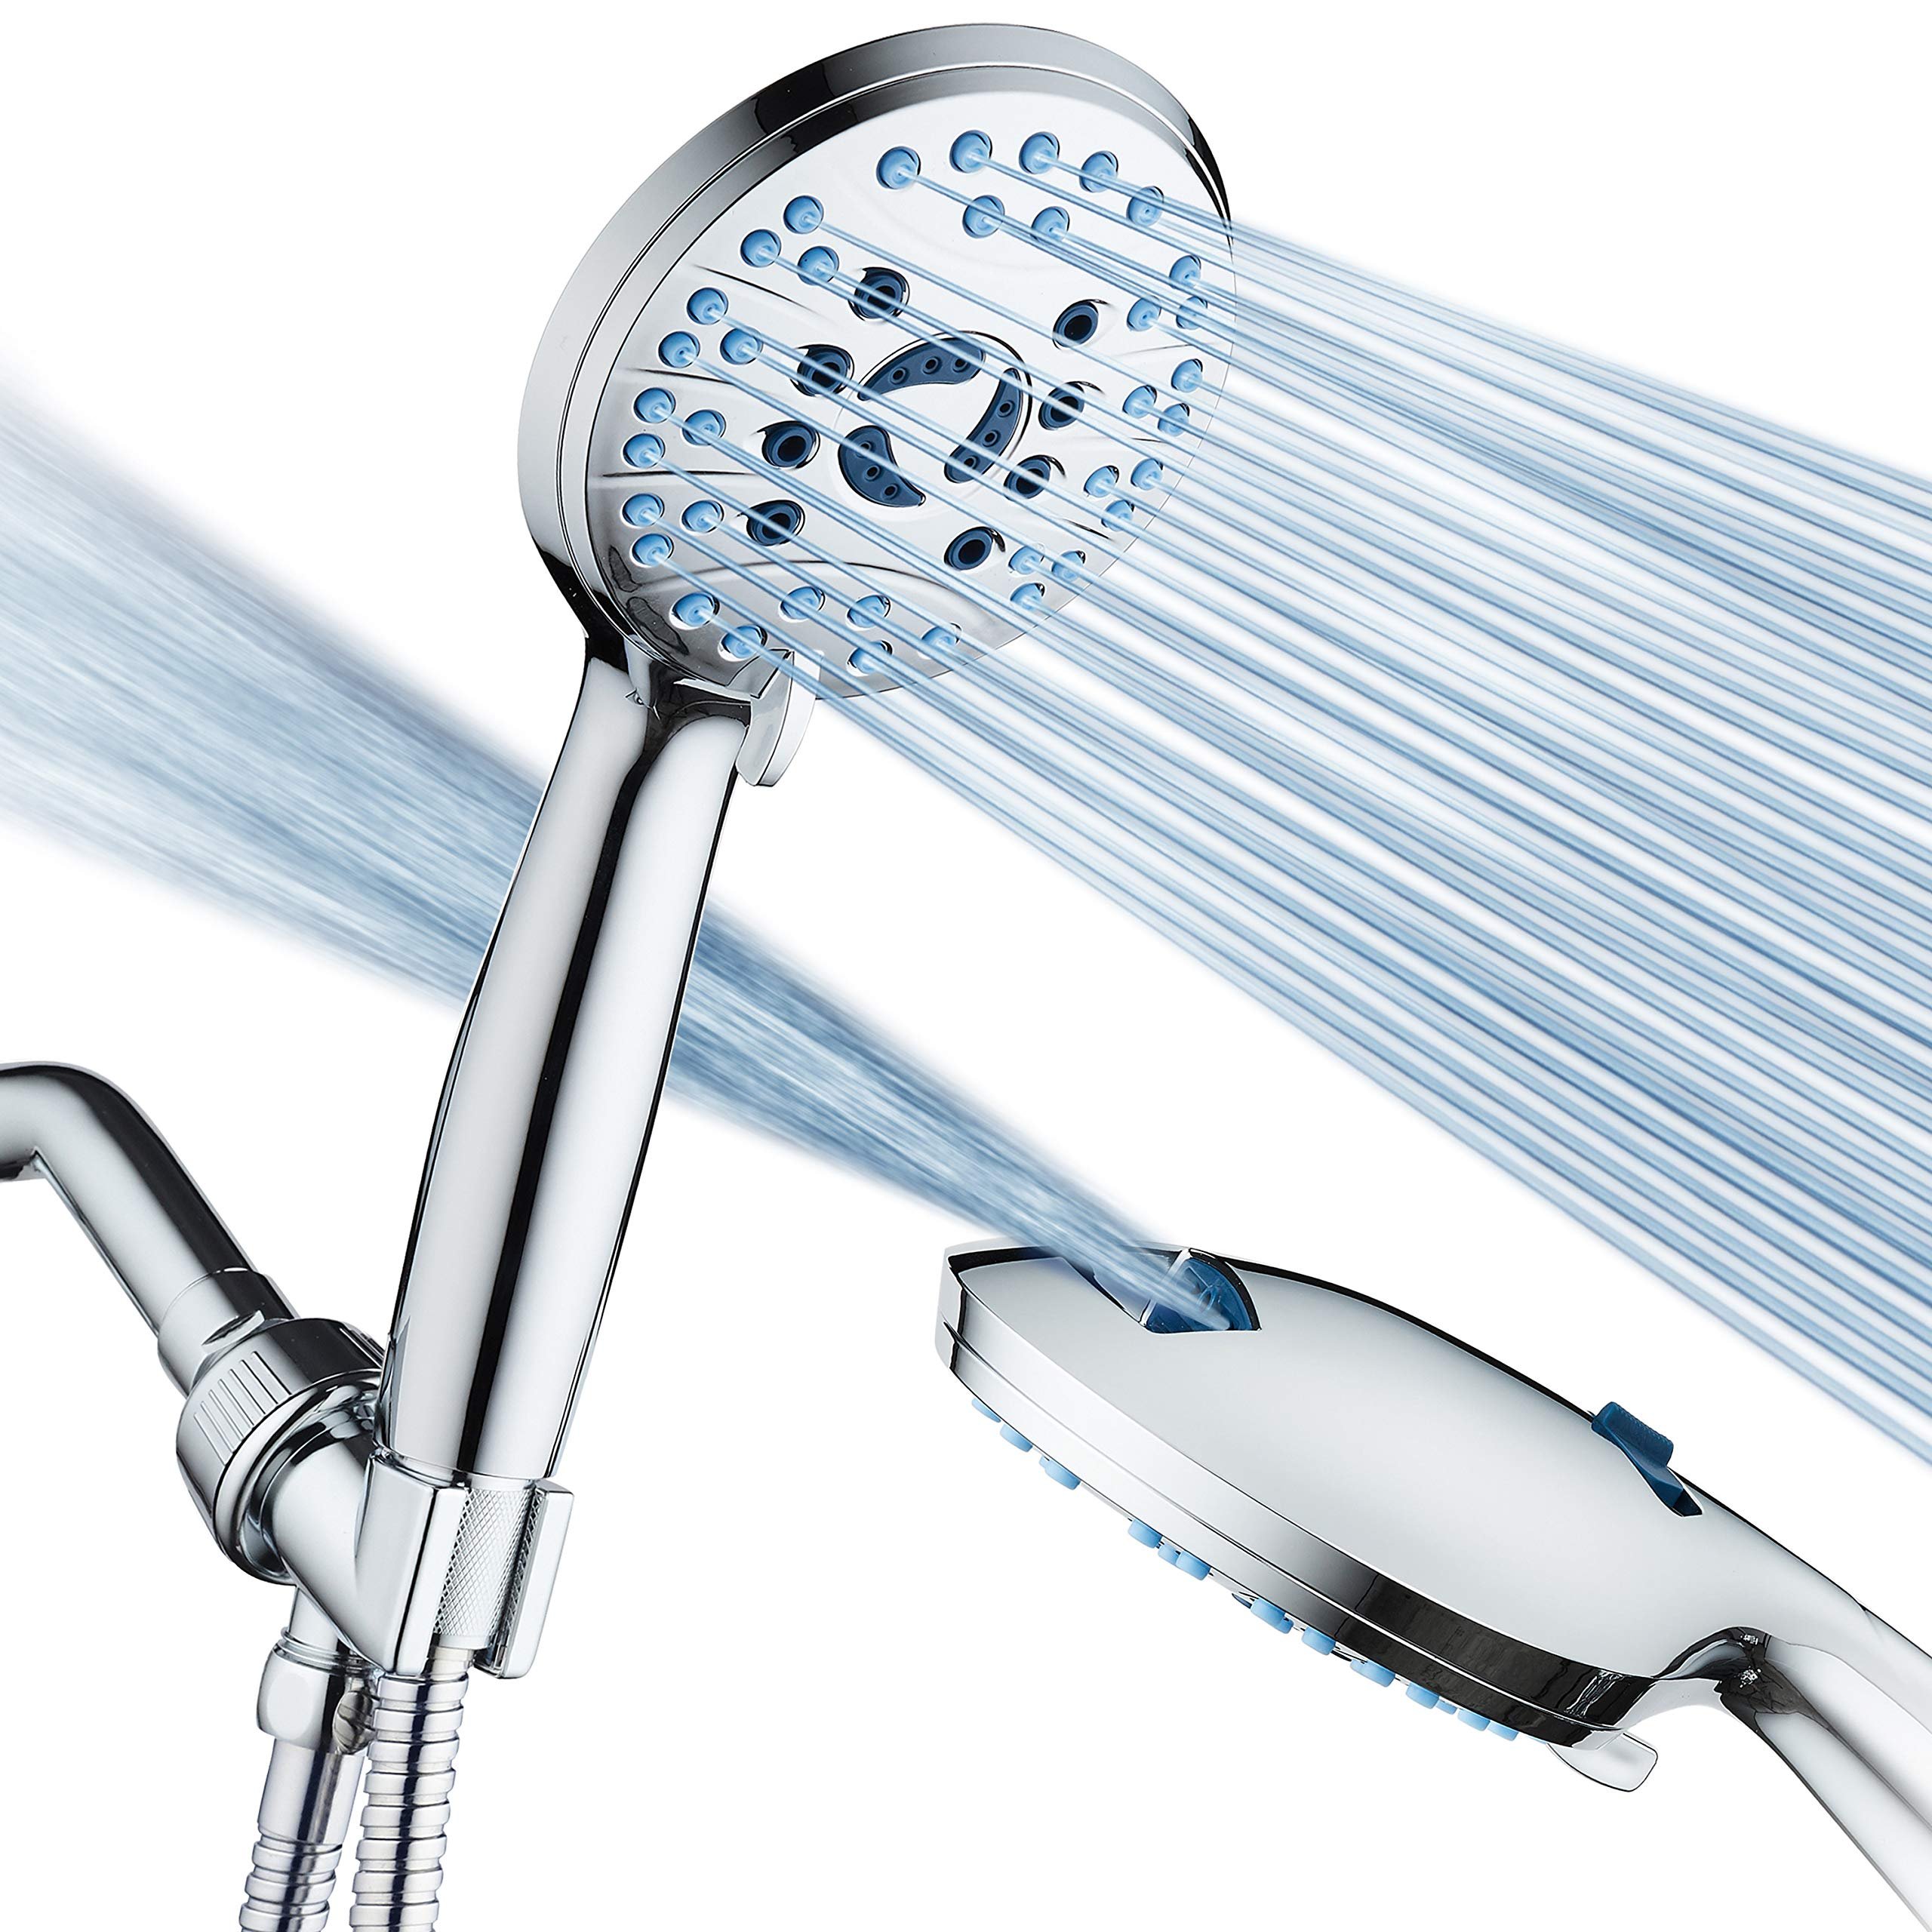 Aquacare Shower Head: Ultimate Guide For Efficiency